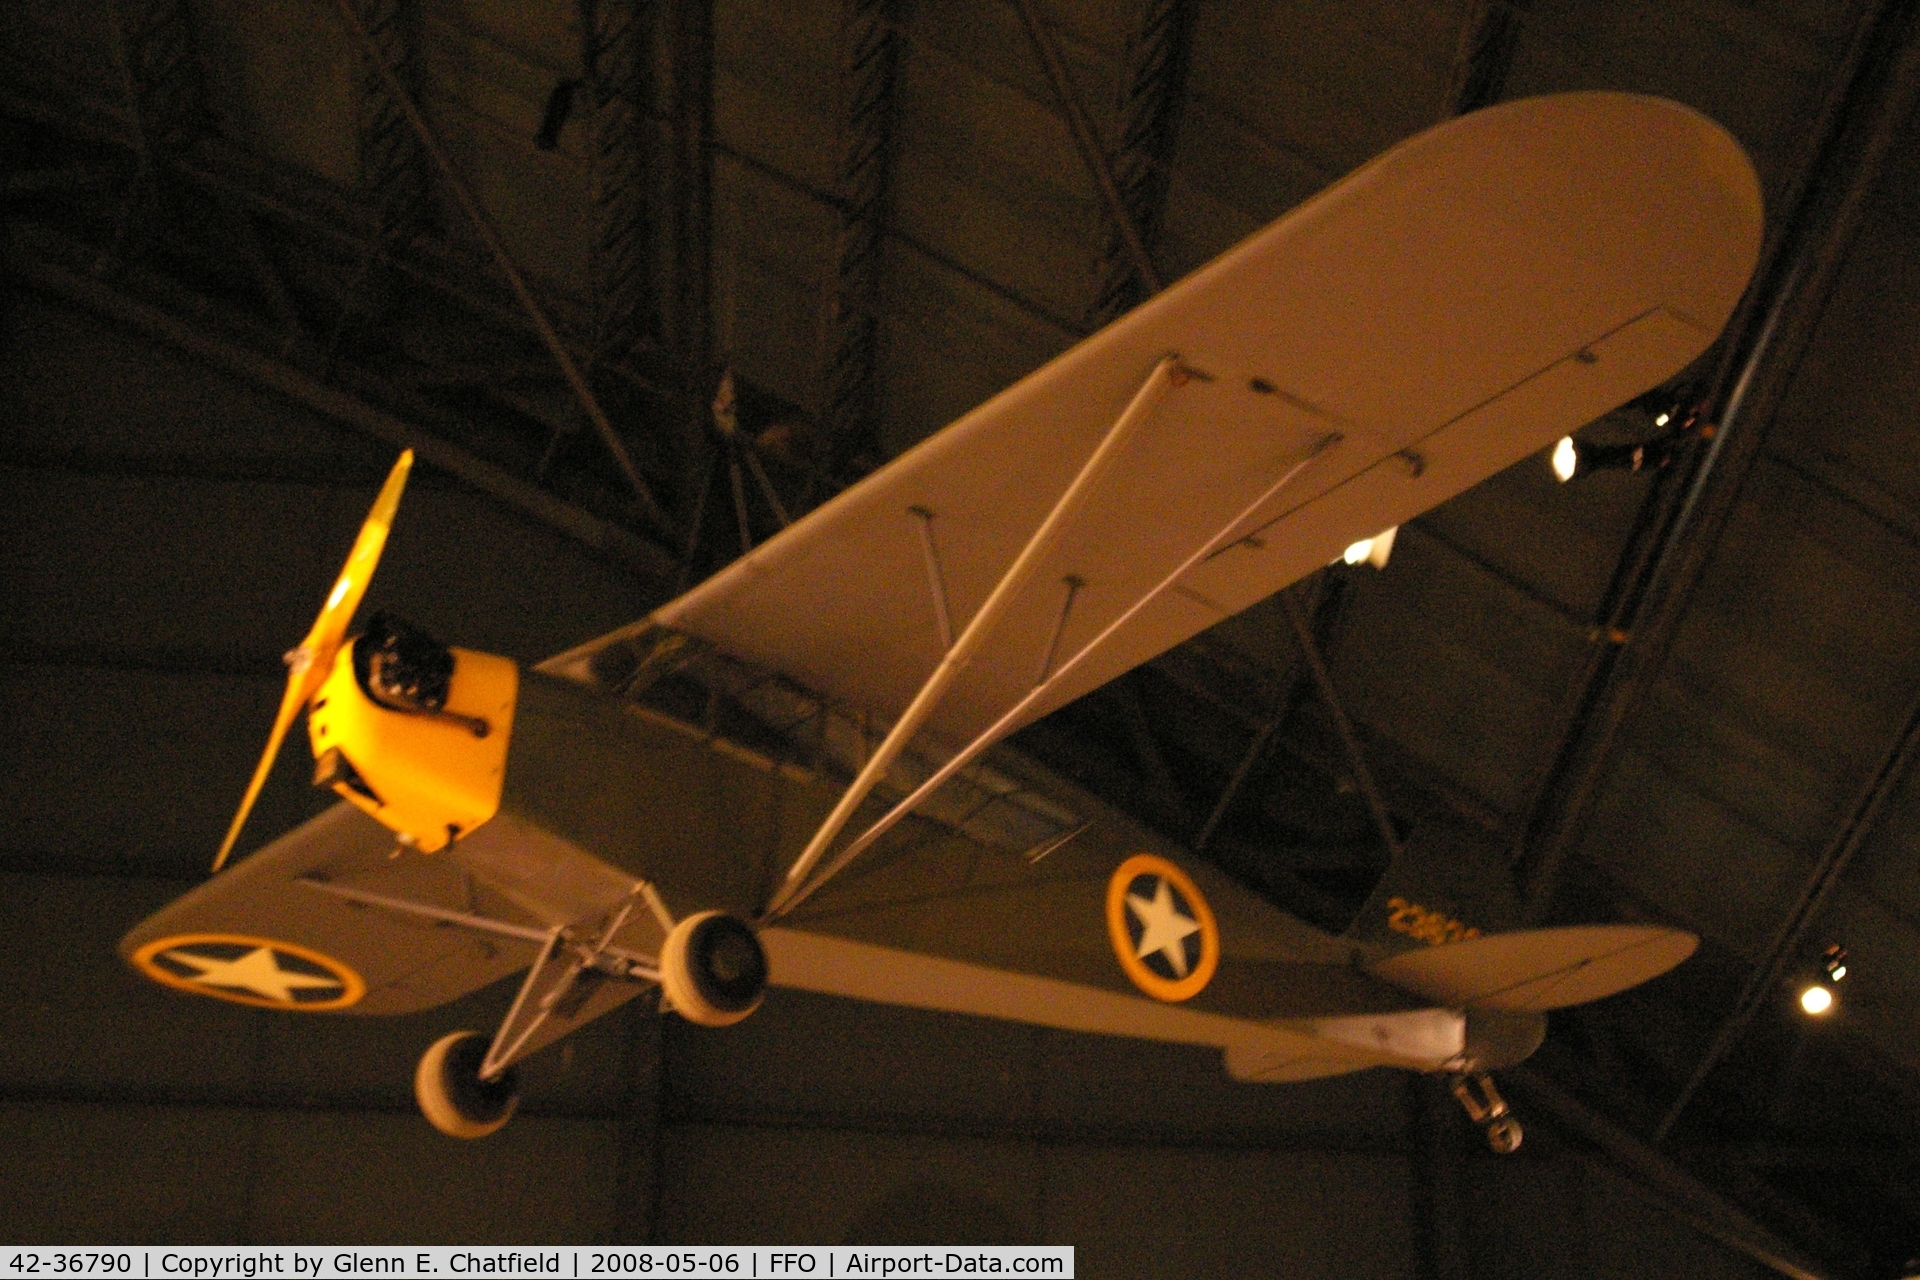 42-36790, Piper L-4A Grasshopper (O-59A / J3C-65) C/N 8914, Hanging from the ceiling in the National Museum of the U.S. Air Force